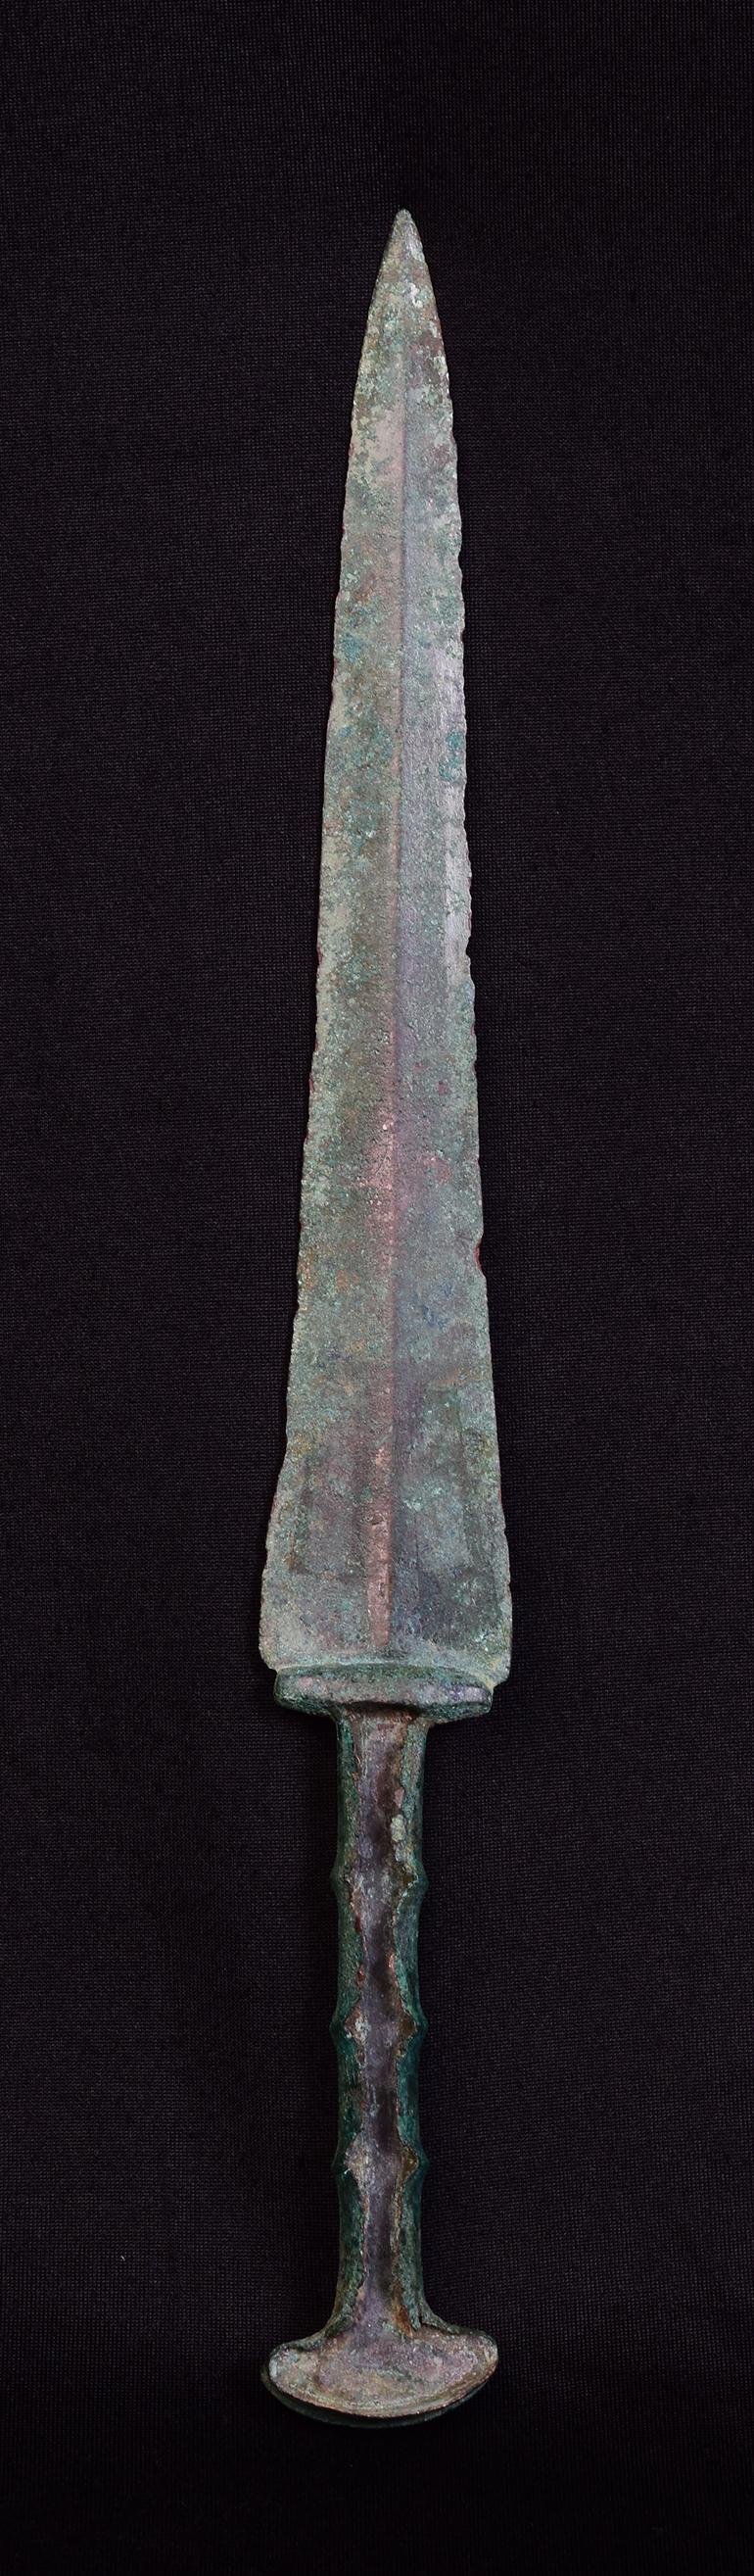 Ancient Luristan bronze short sword with green patina.

Luristan bronze comes from the province of Lorestan, a region of nowadays Western Iran in the Zagros Mountains. With its rich and long history, Luristan culture is well-known for its